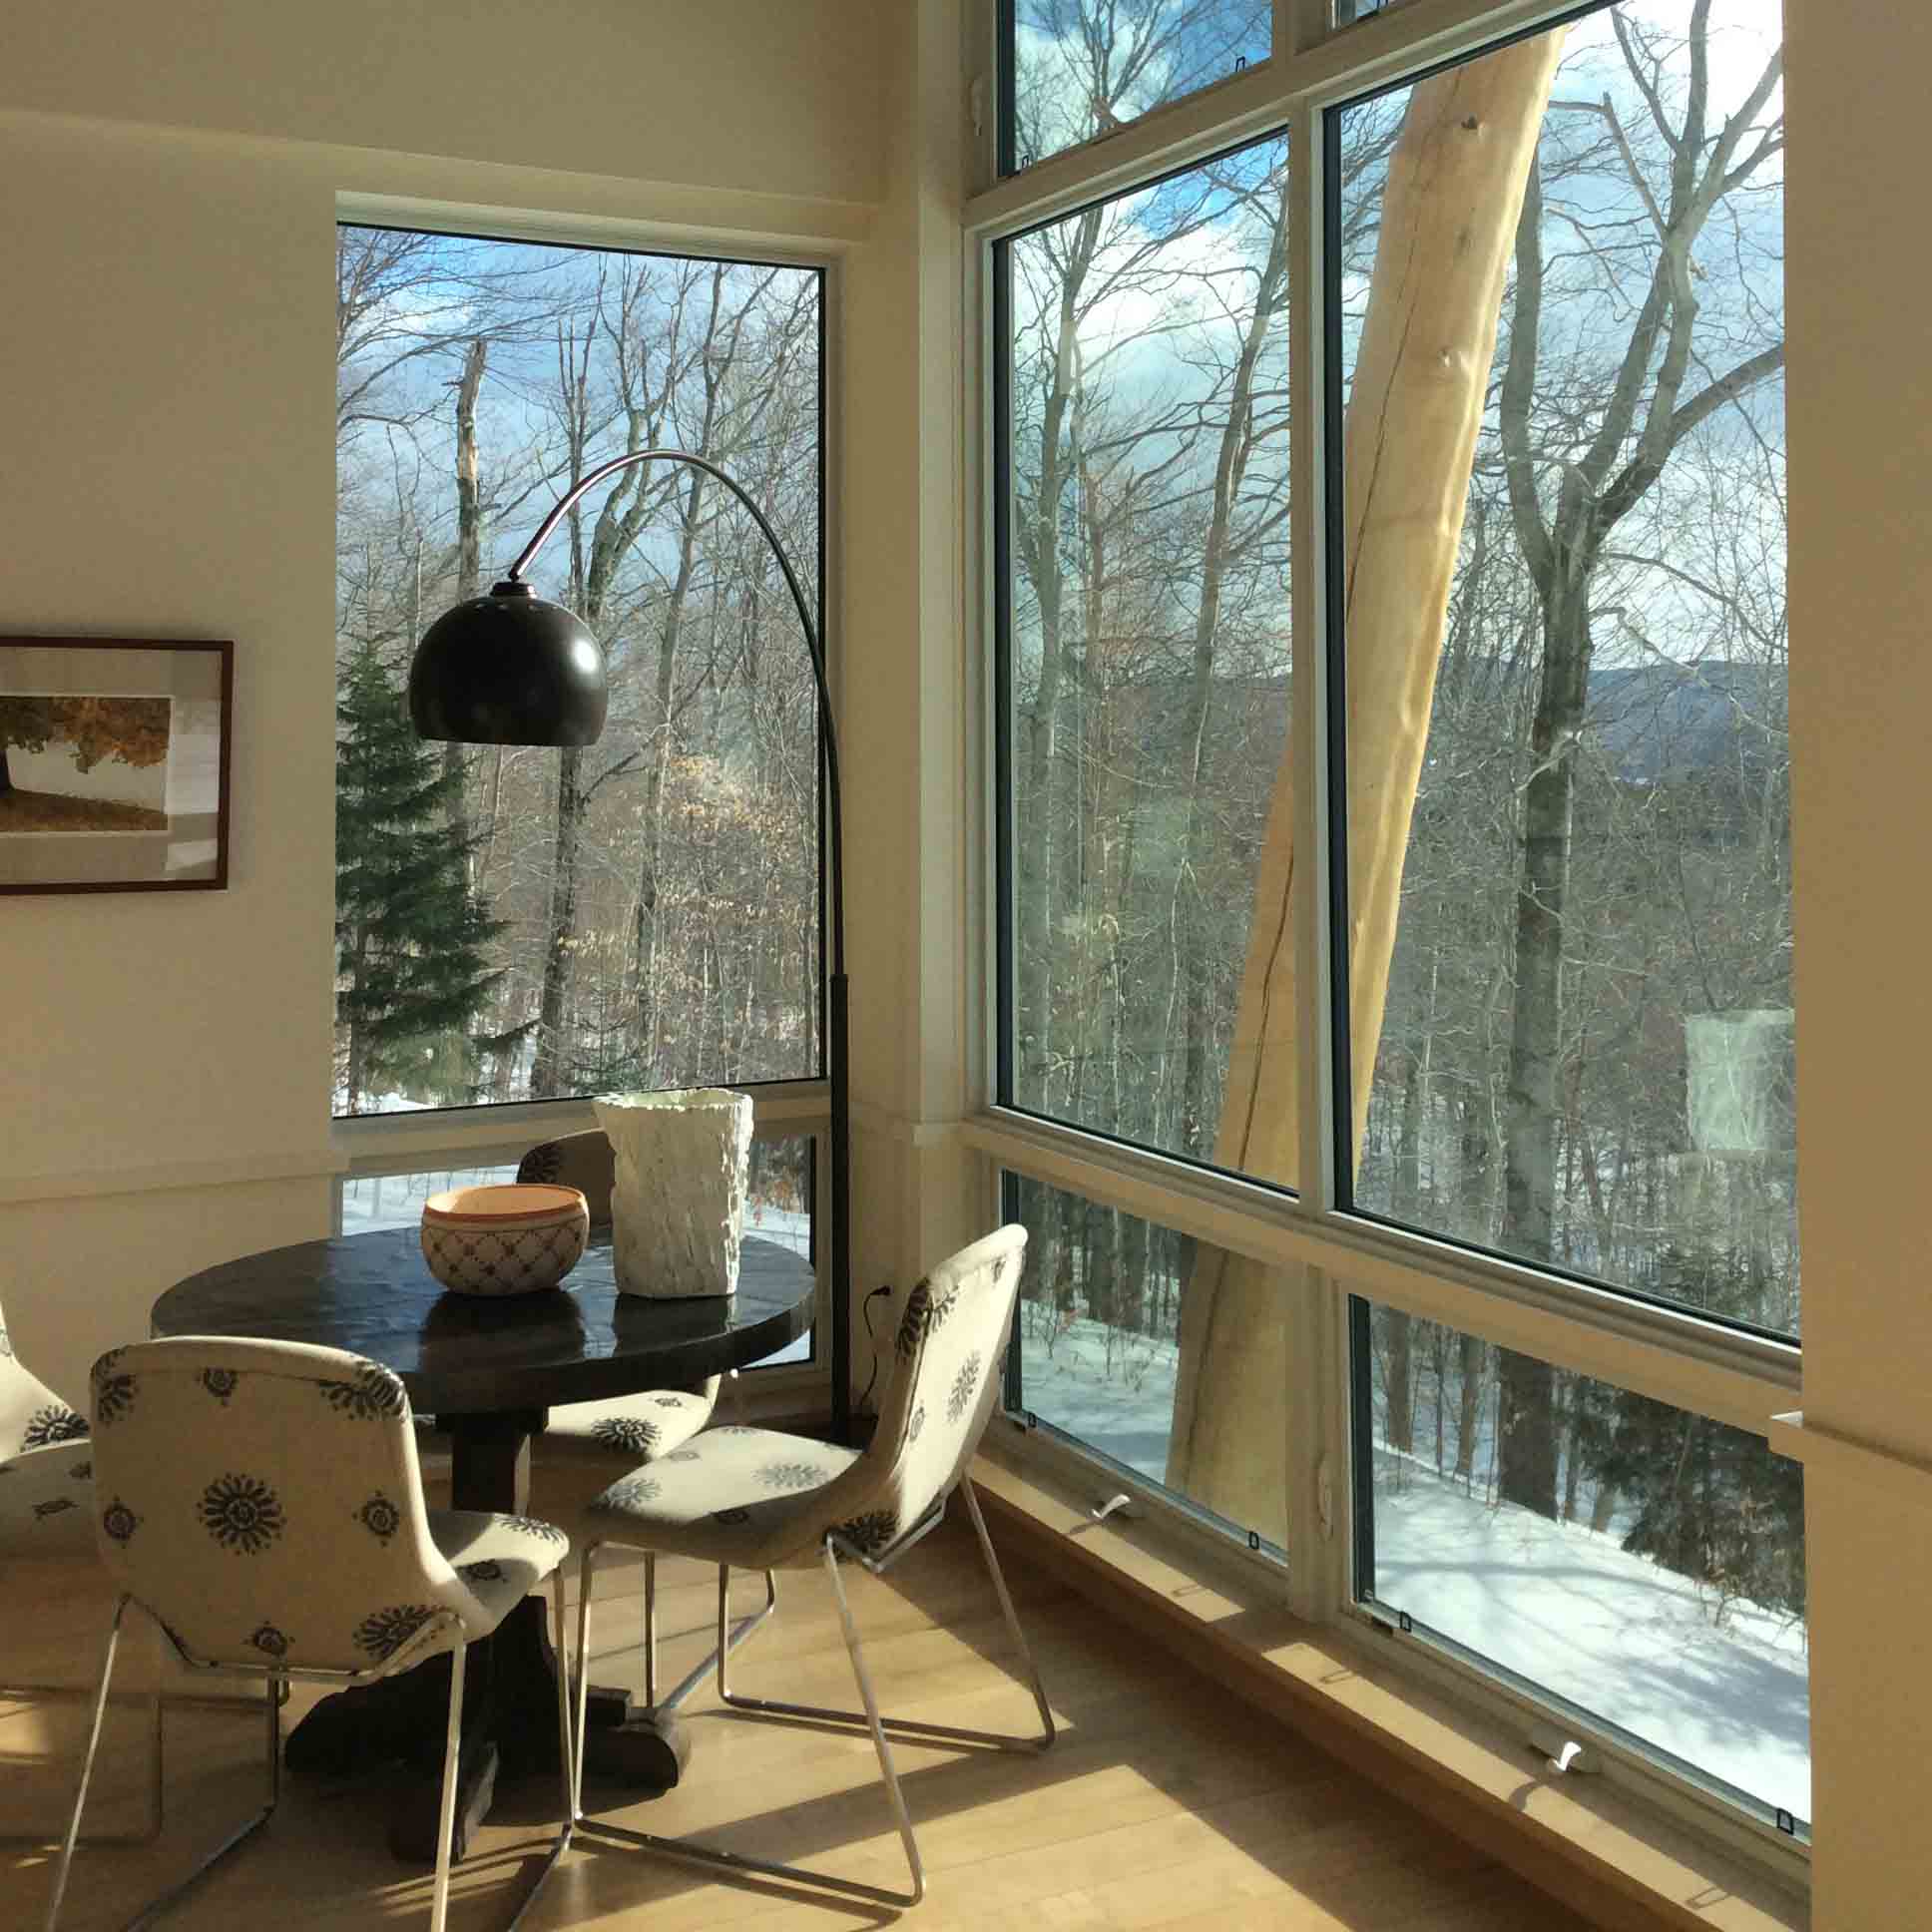 Vermont Architect Chris Cook favorite projects